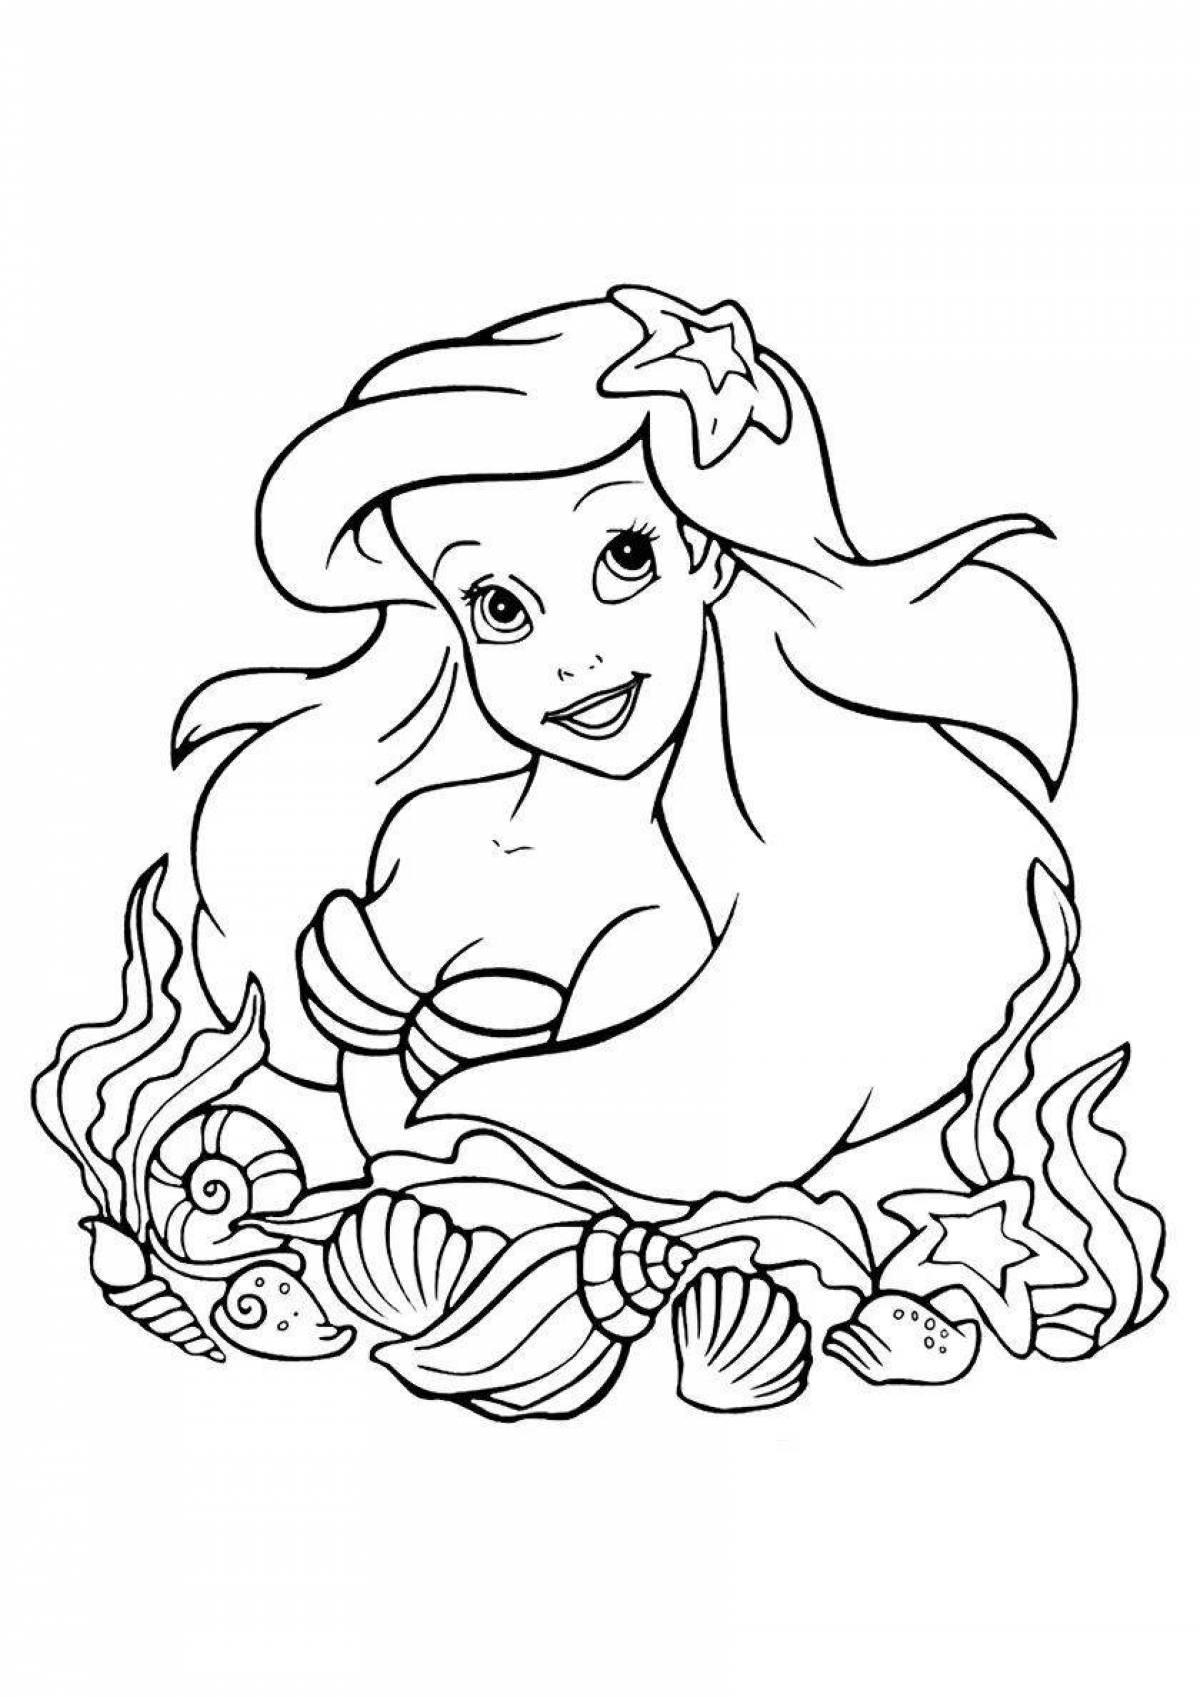 Fun coloring book ariel the little mermaid for girls